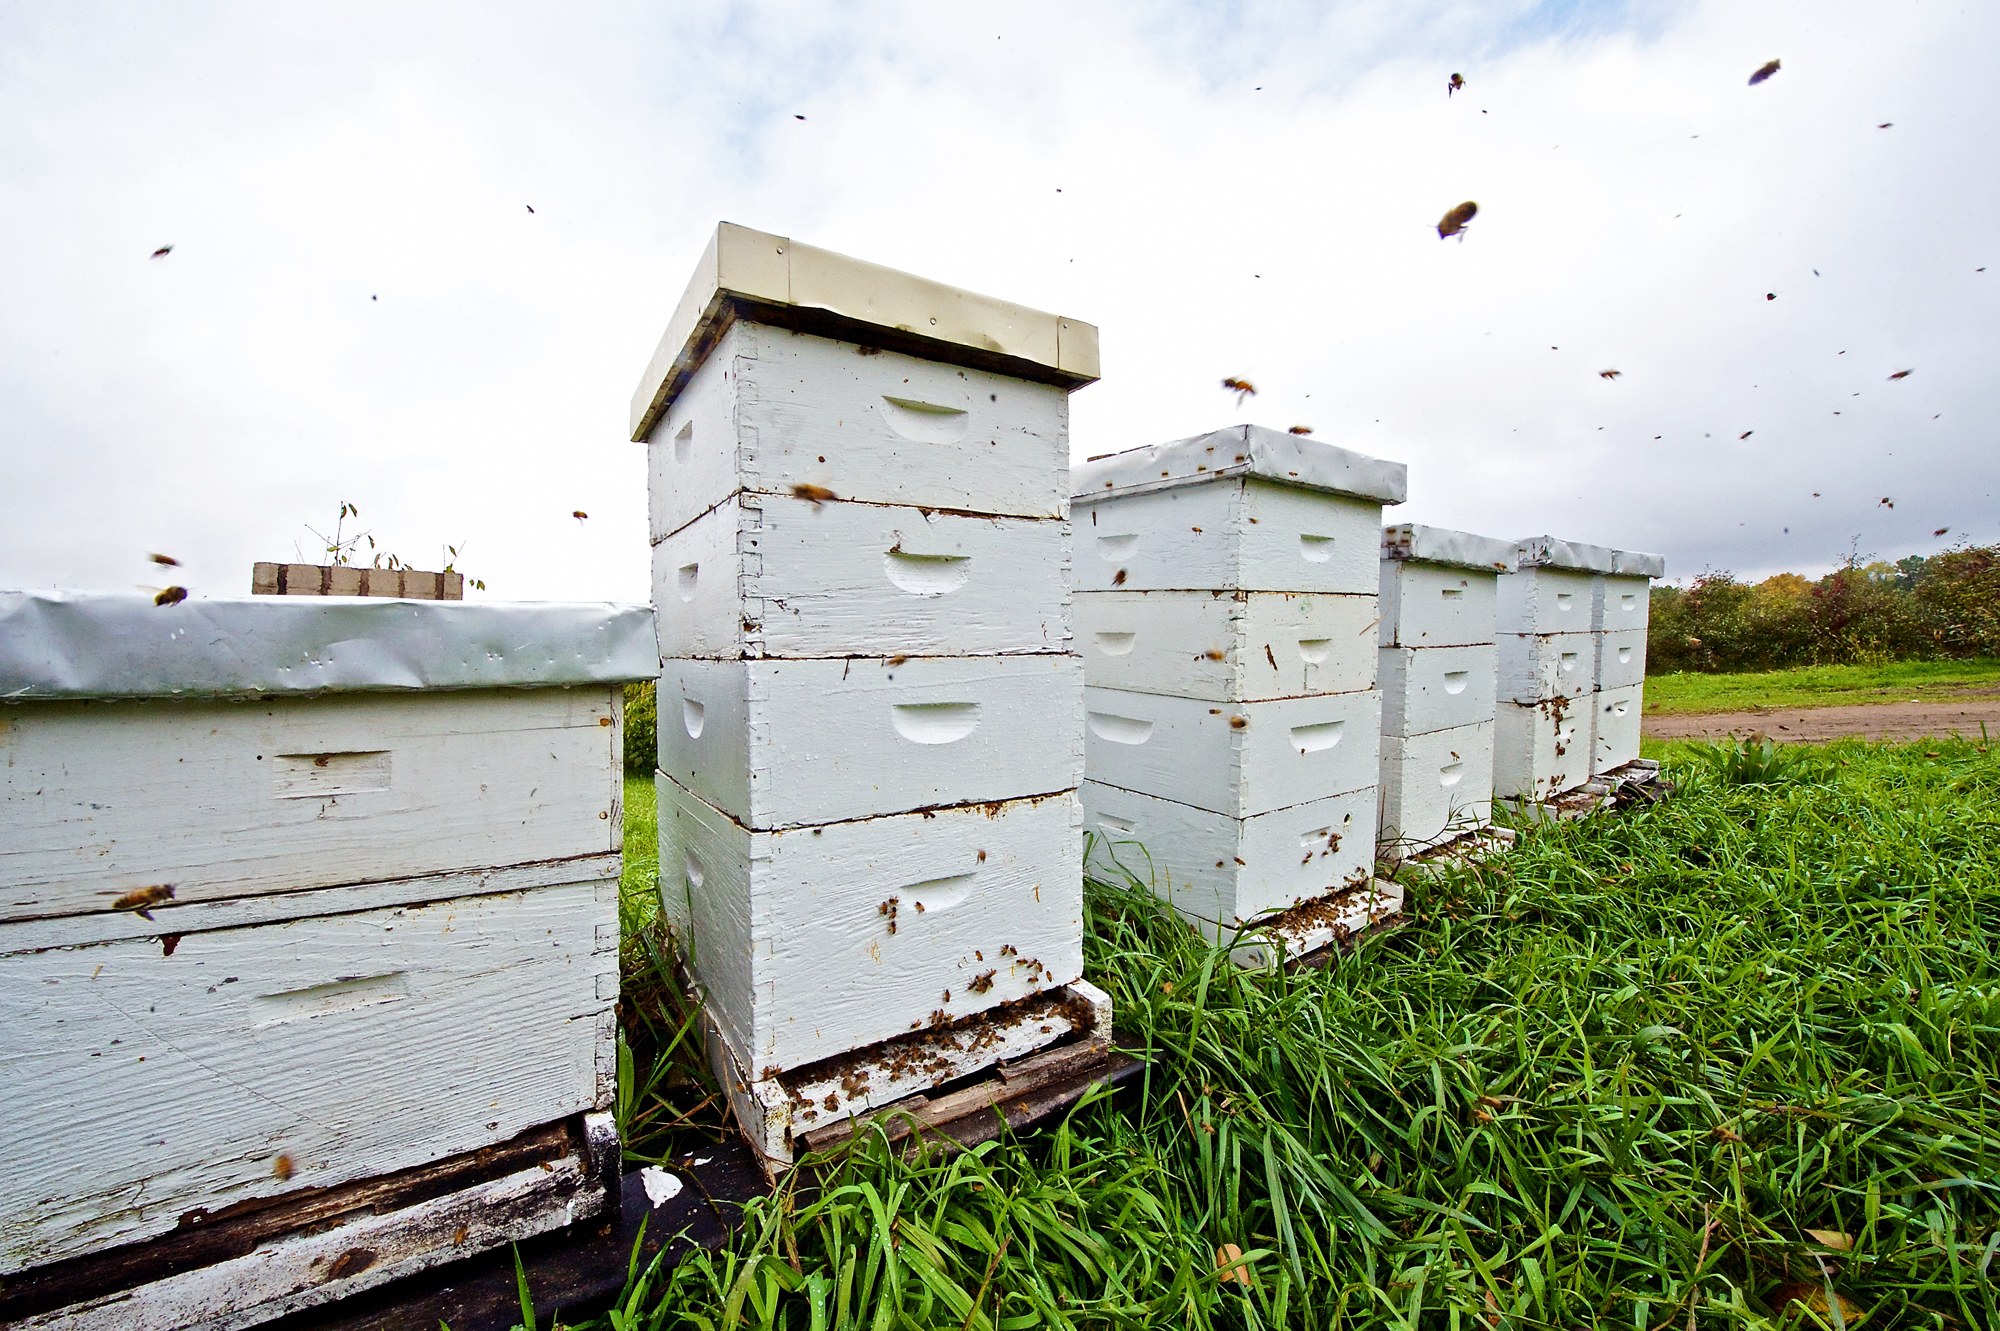  Bee Hives; honey bees; wood; orchard; apple; michigan; pure; insects; animal; nature; photography; photographer; fly; grass; plants; pollen; polination 